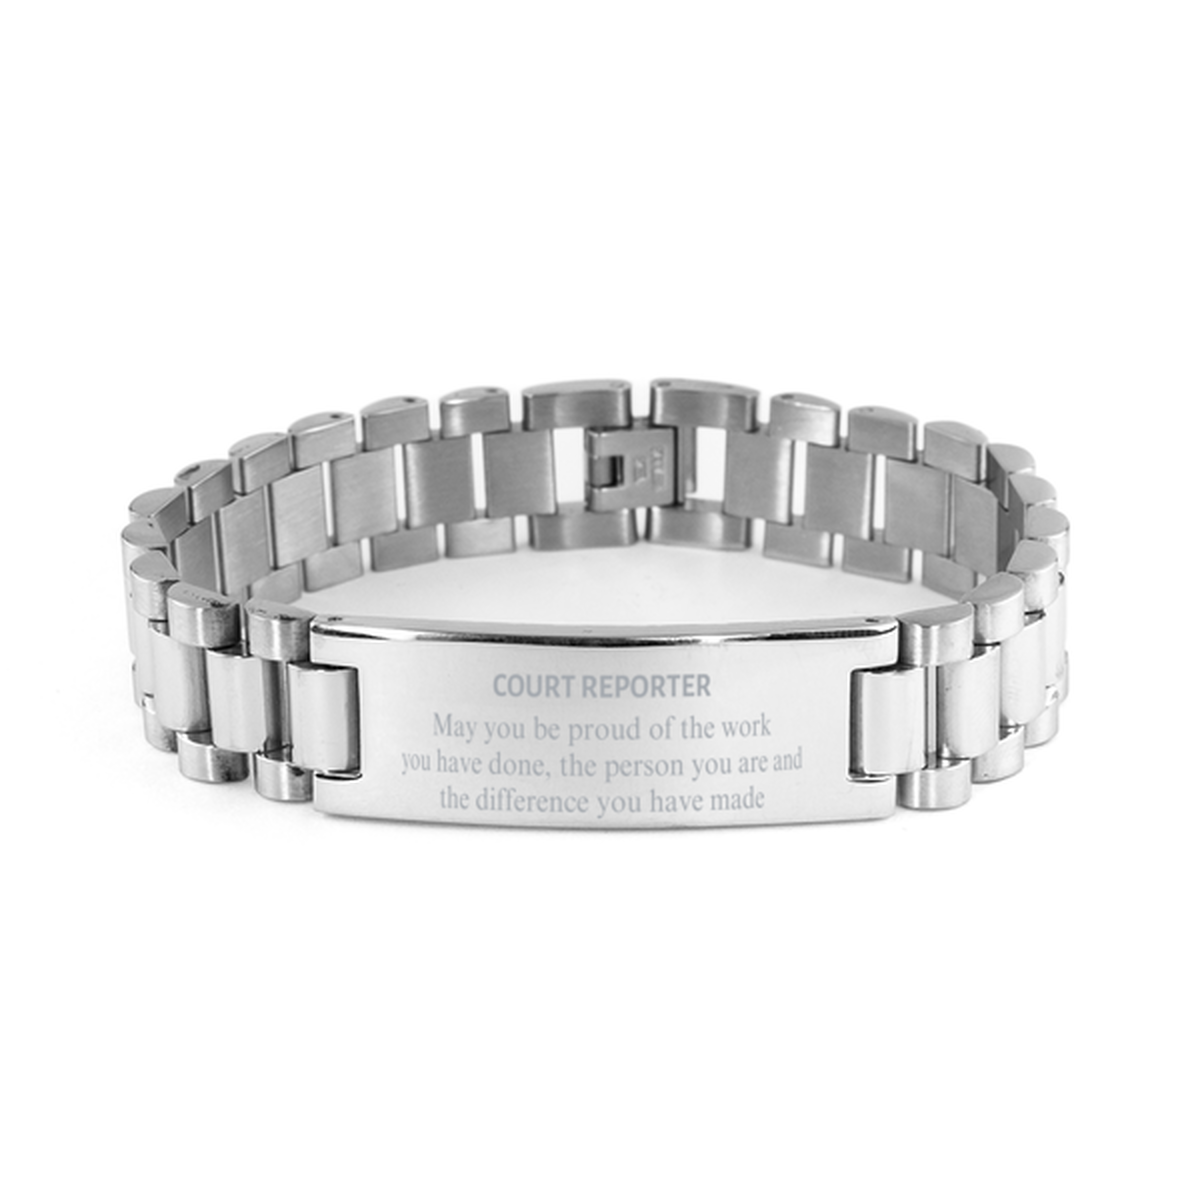 Court Reporter May you be proud of the work you have done, Retirement Court Reporter Ladder Stainless Steel Bracelet for Colleague Appreciation Gifts Amazing for Court Reporter